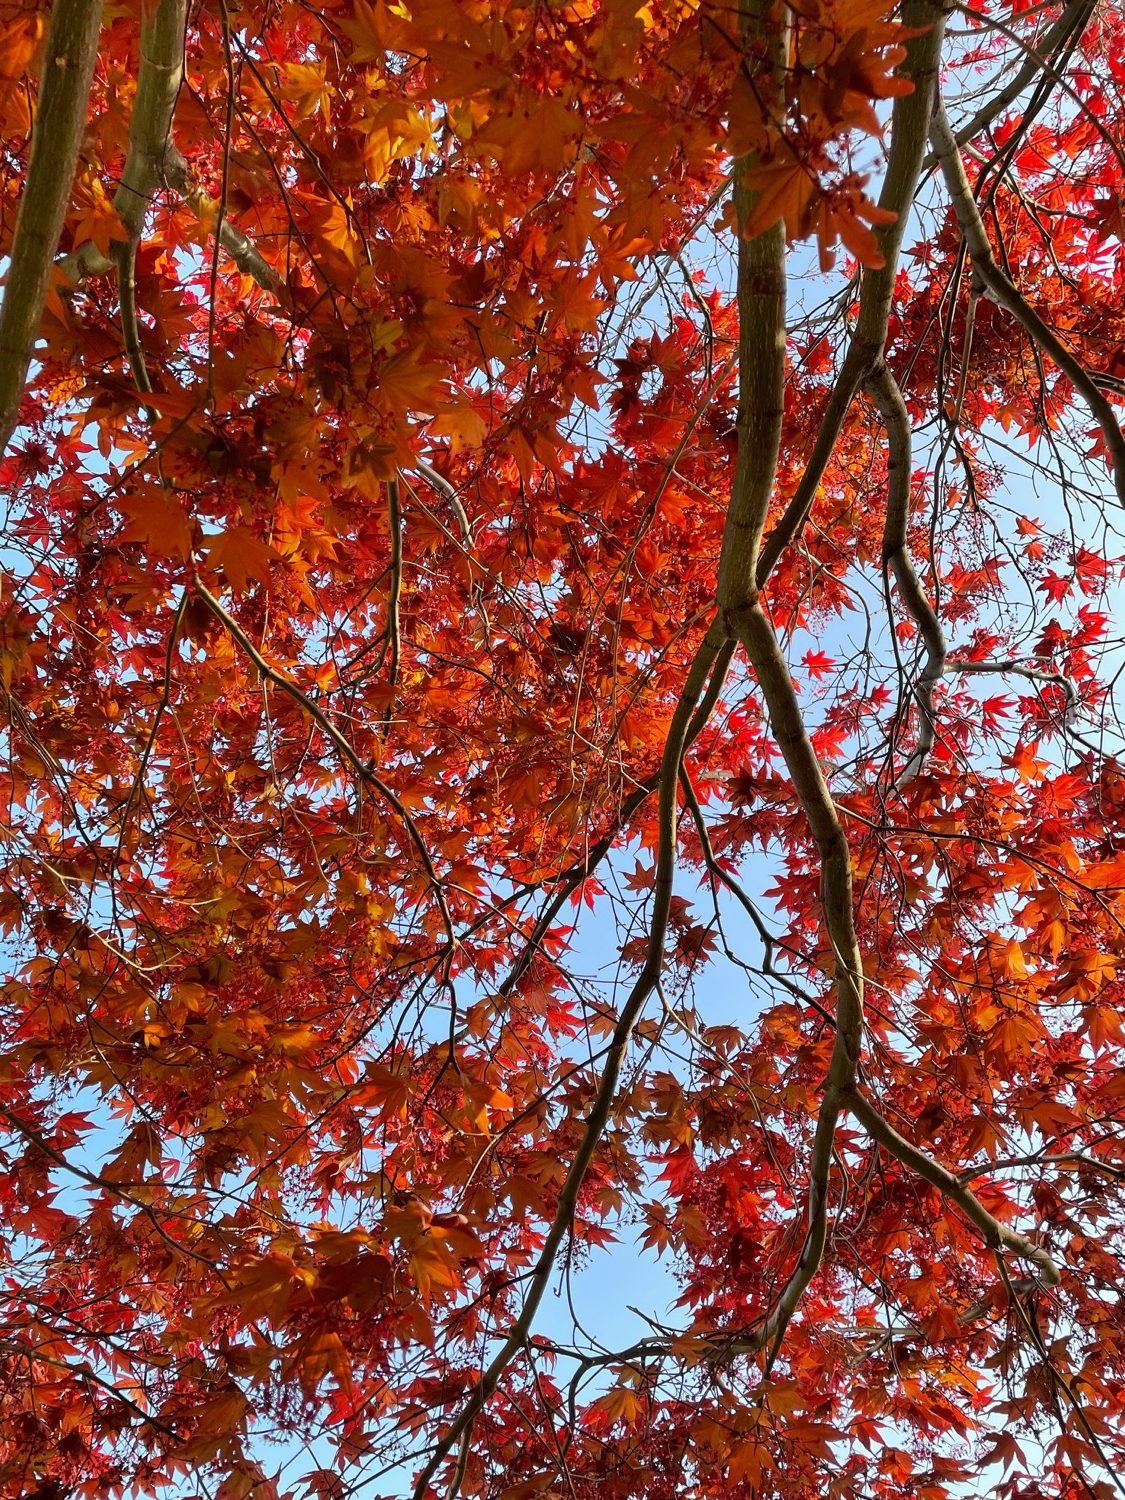 looking up at a tree canopy covered in vibrant red leaves. blue sky peaks through at some of the branches